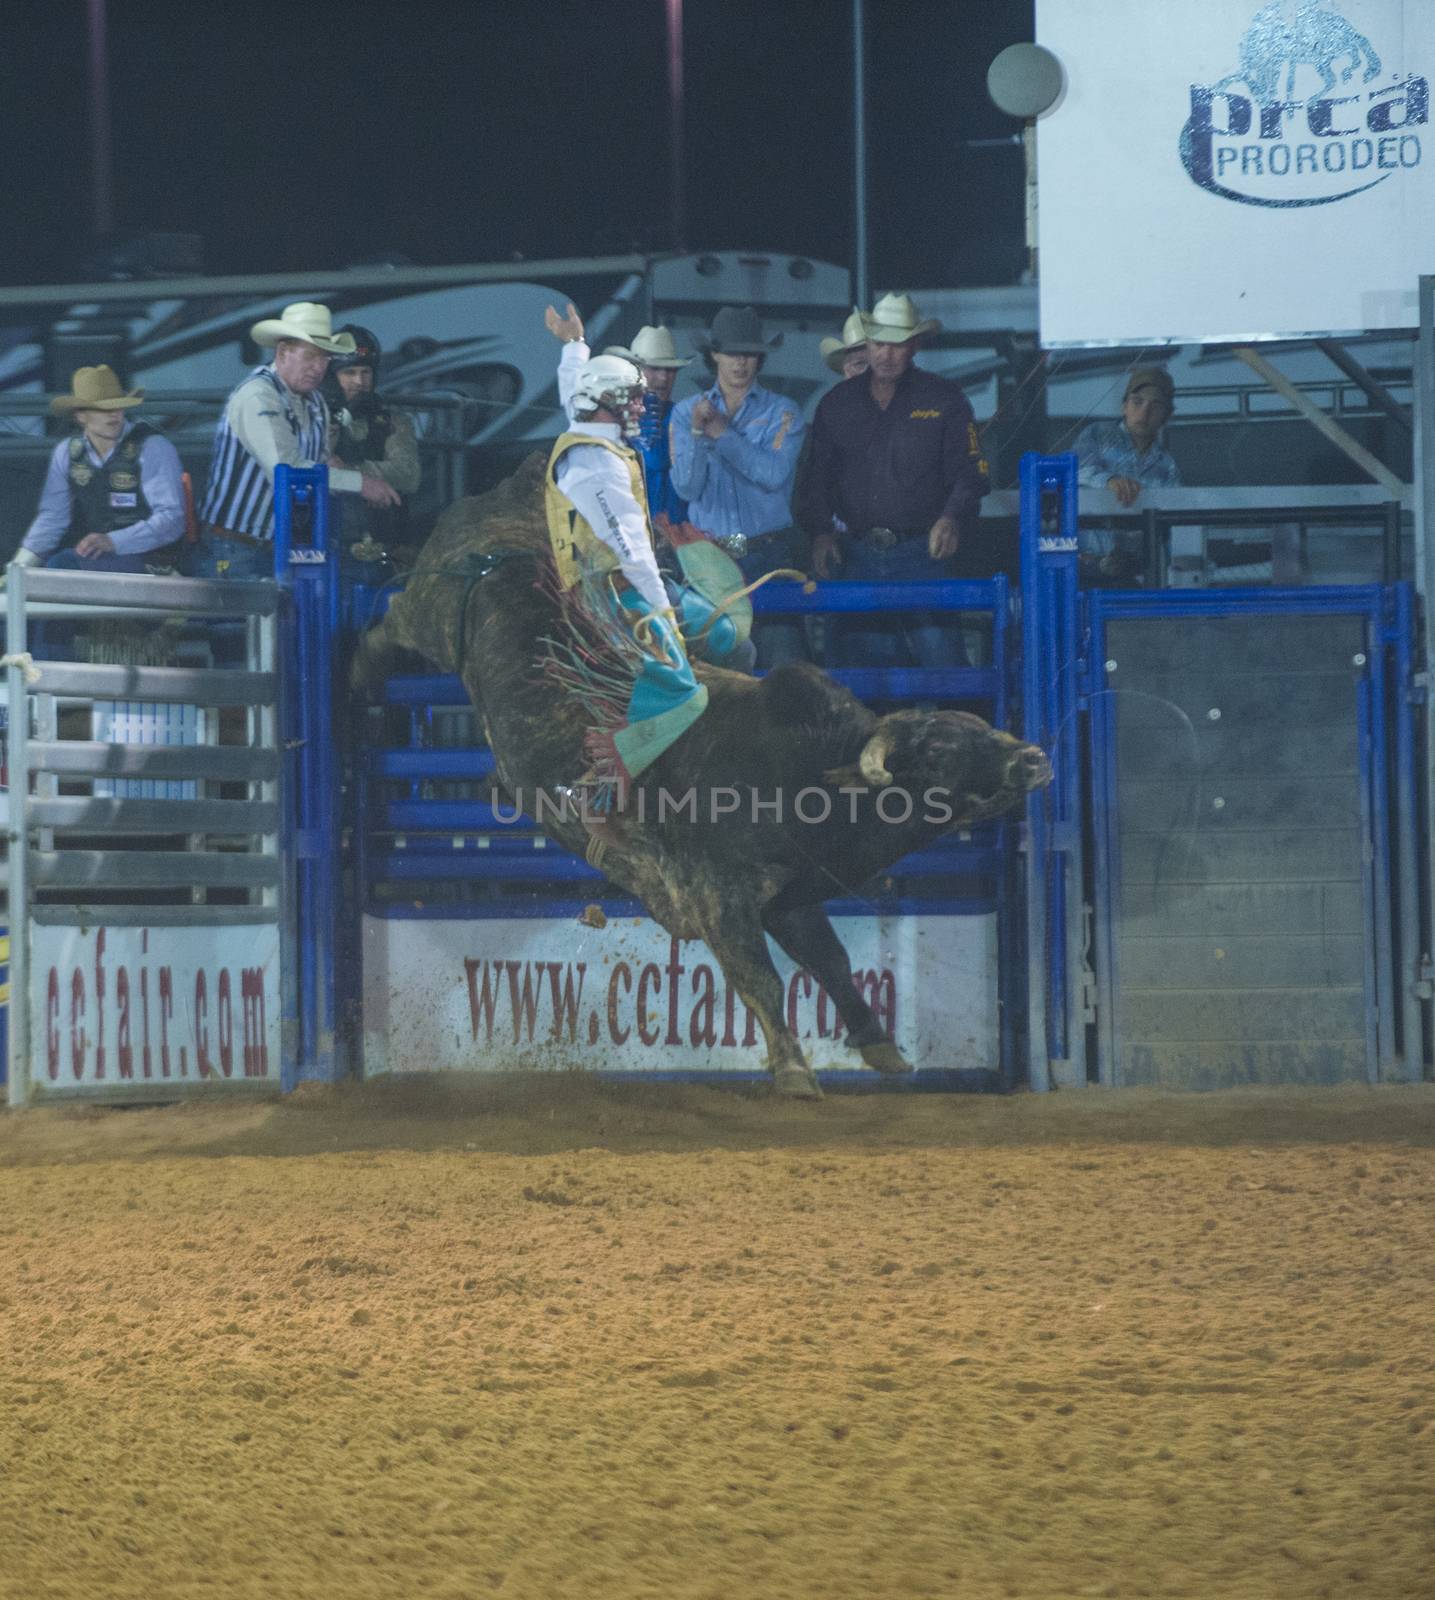 LOGANDALE , NEVADA - APRIL 10 : Cowboy Participating in a Bull riding Competition at the Clark County Fair and Rodeo a Professional Rodeo held in Logandale Nevada , USA on April 10 2014 